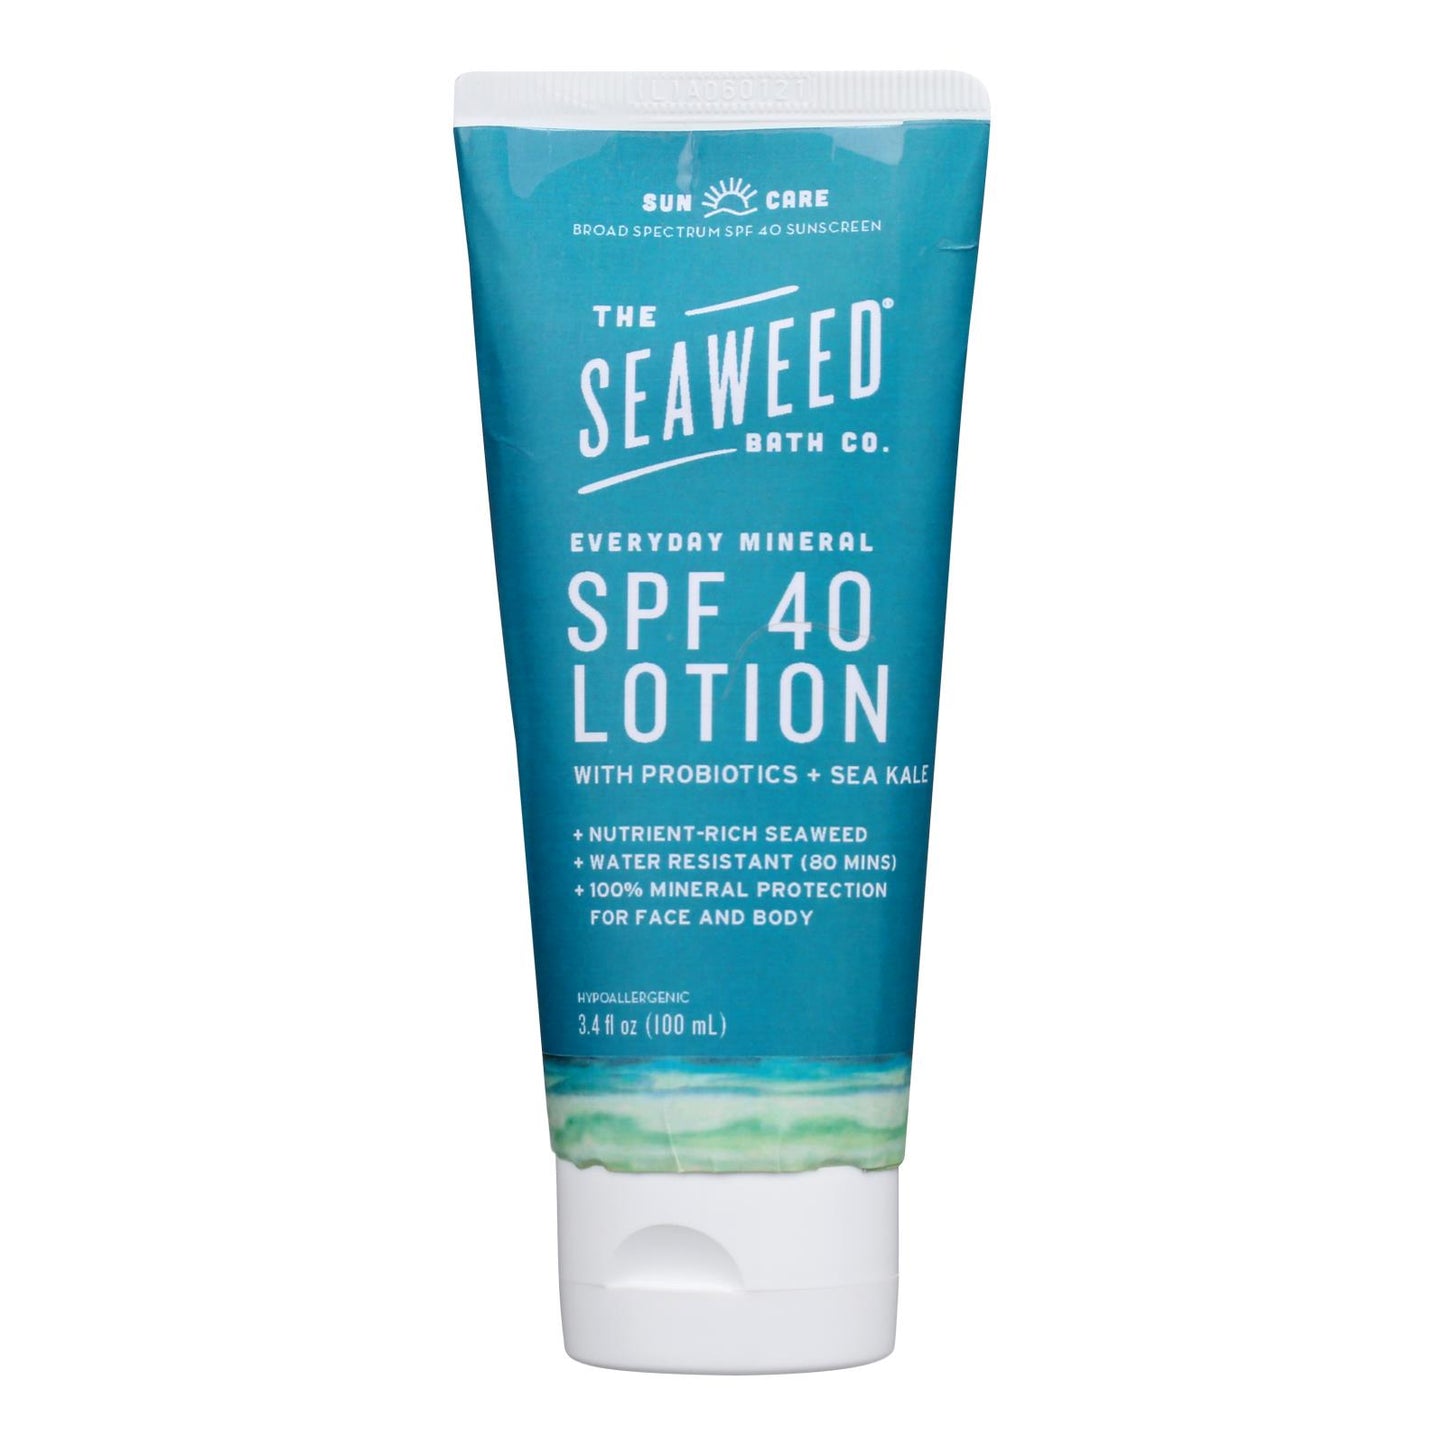 The Seaweed Bath Co SPF 40 Mineral Sunscreen Lotion, 3.4 oz.